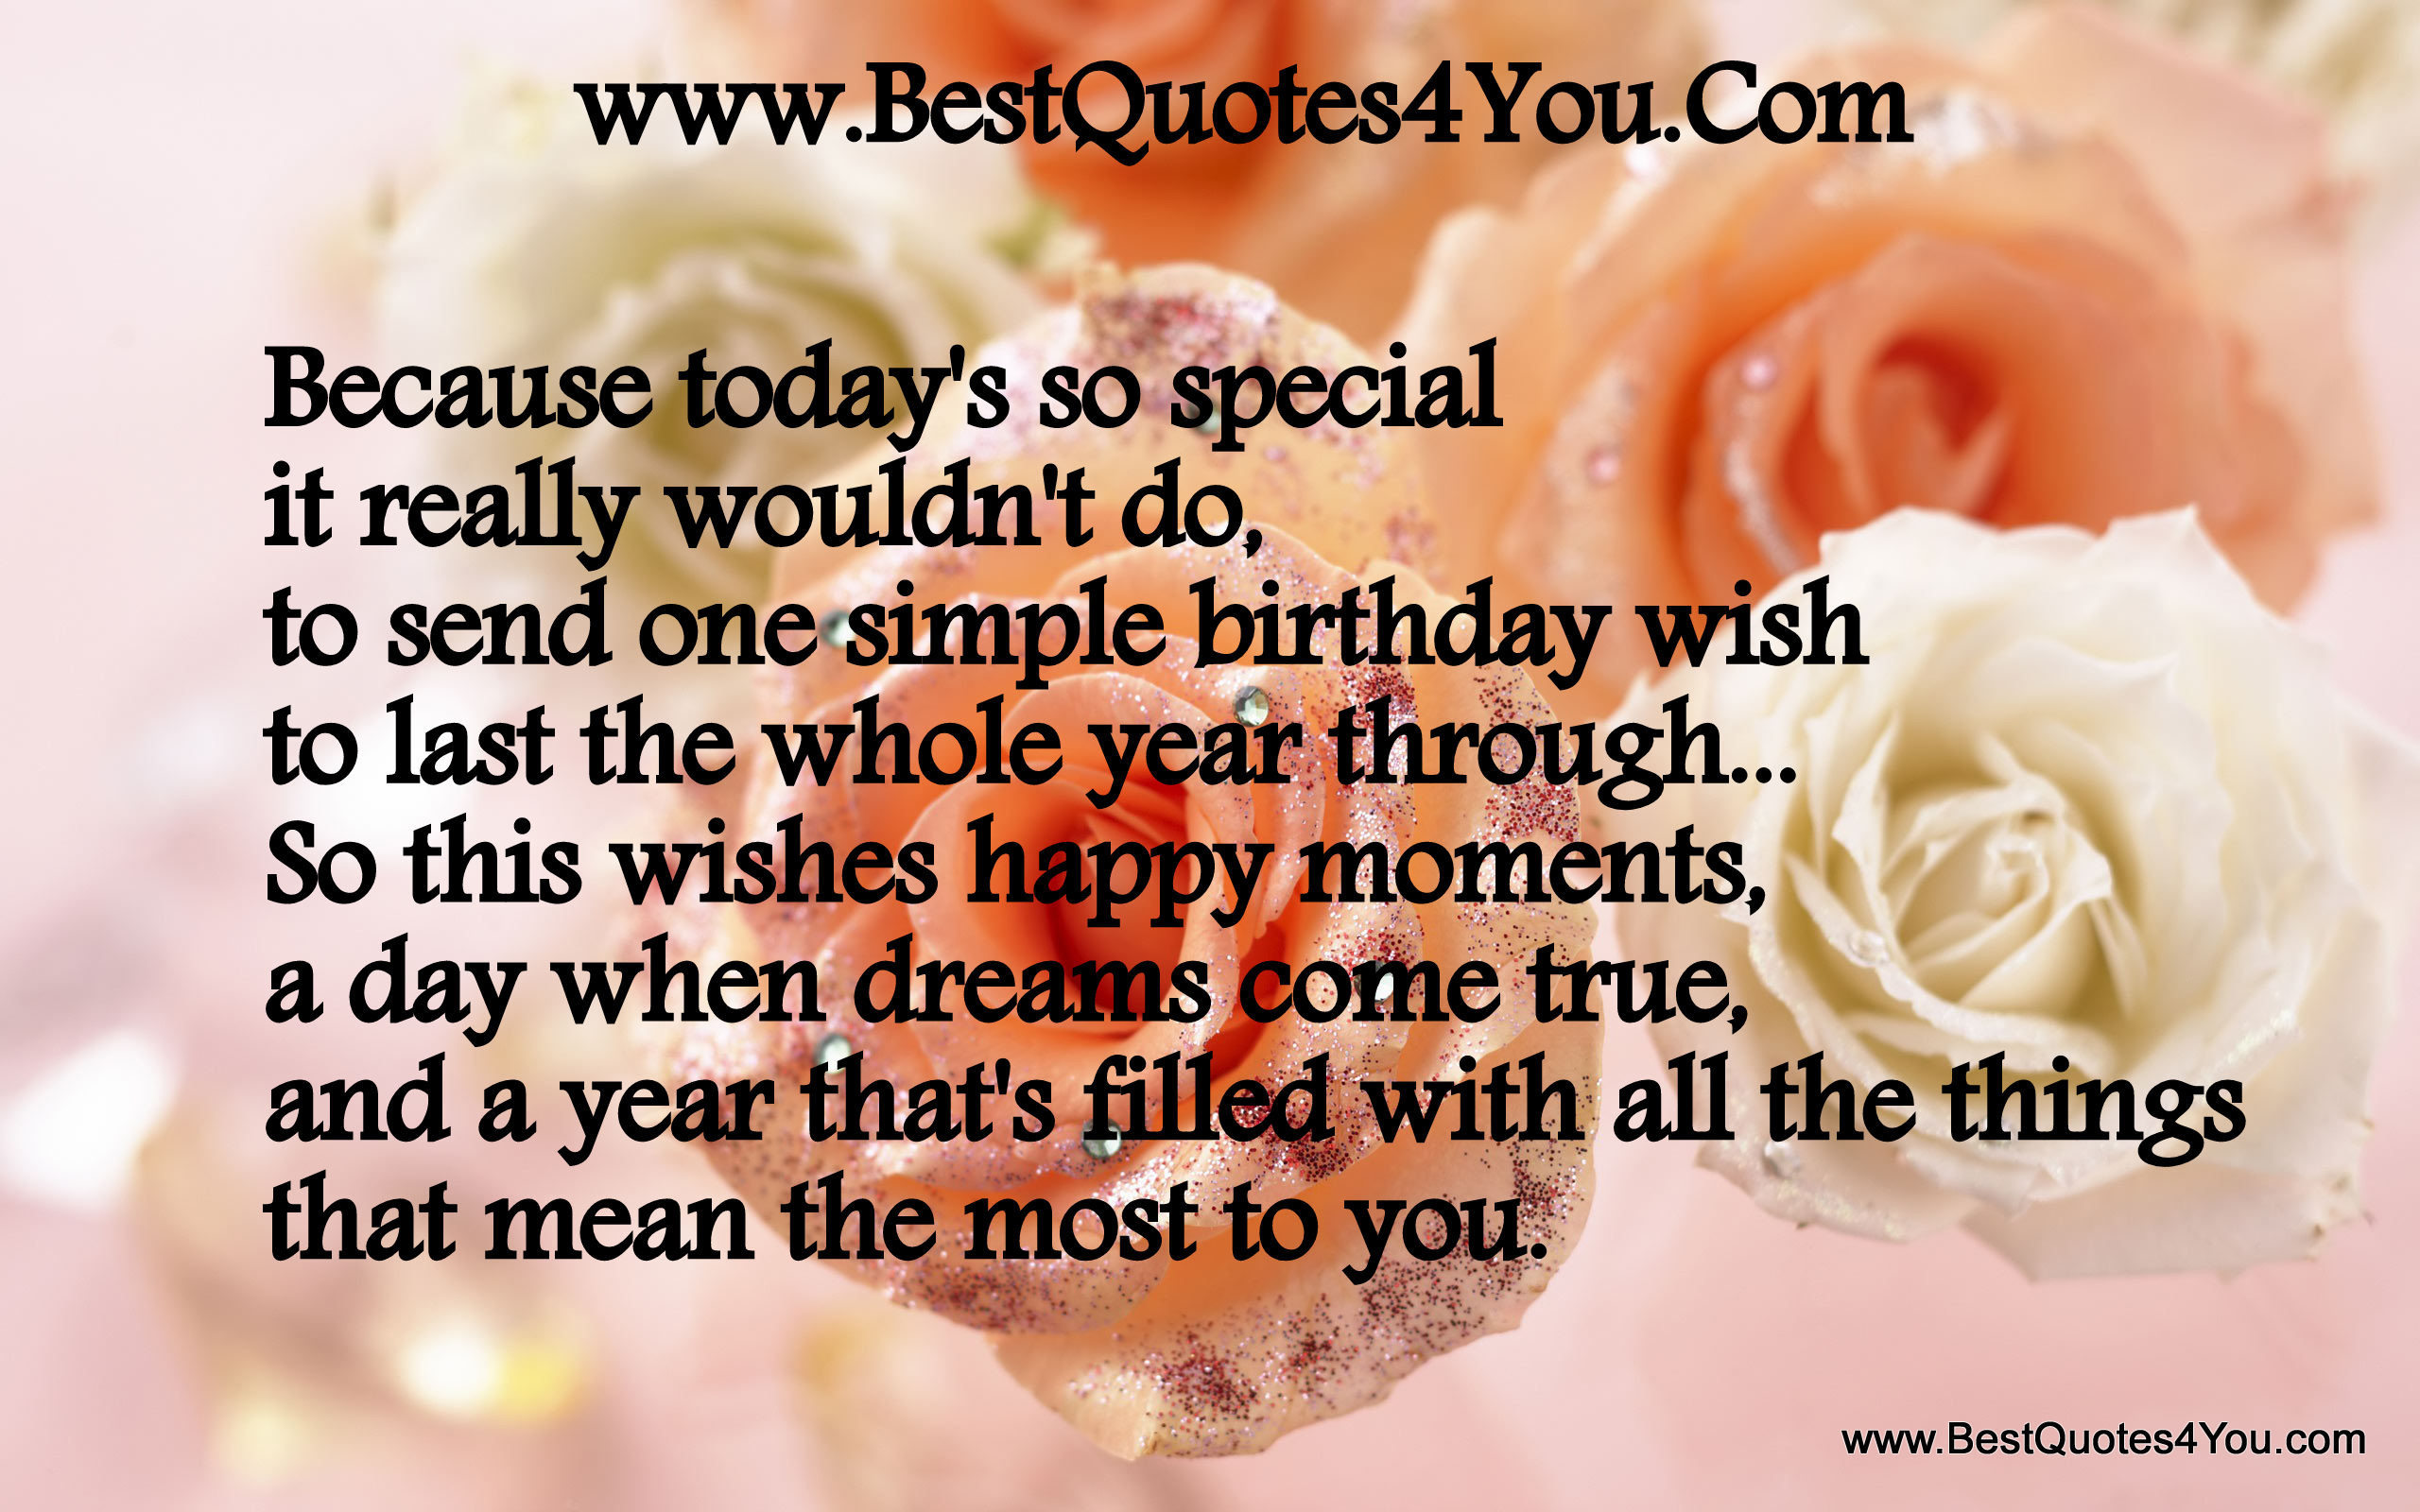 Birthday Wishes For Him Quotes
 y Happy Birthday Quotes For Him QuotesGram